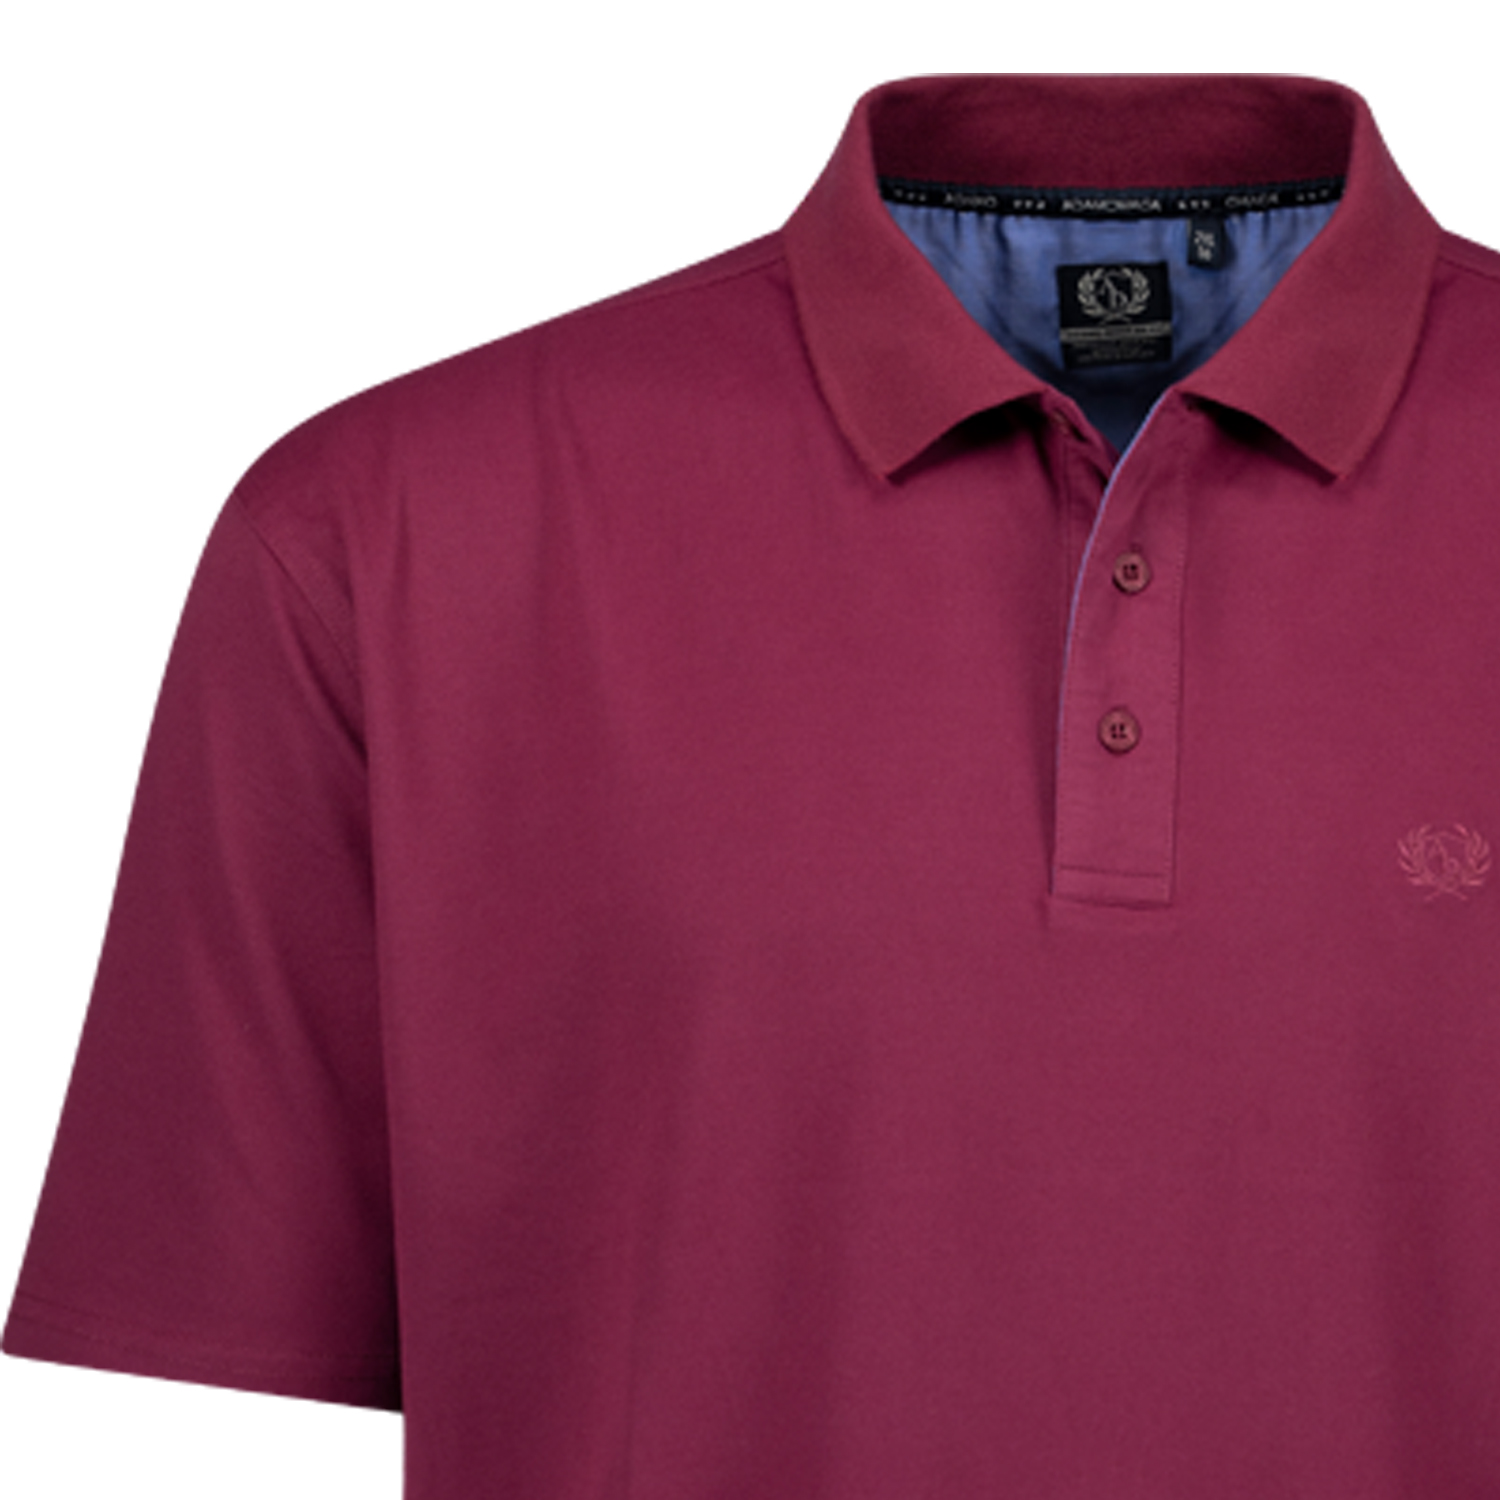 Short sleeve polo shirt PICCO by ADAMO in blackberry for men in large sizes up to 12XL